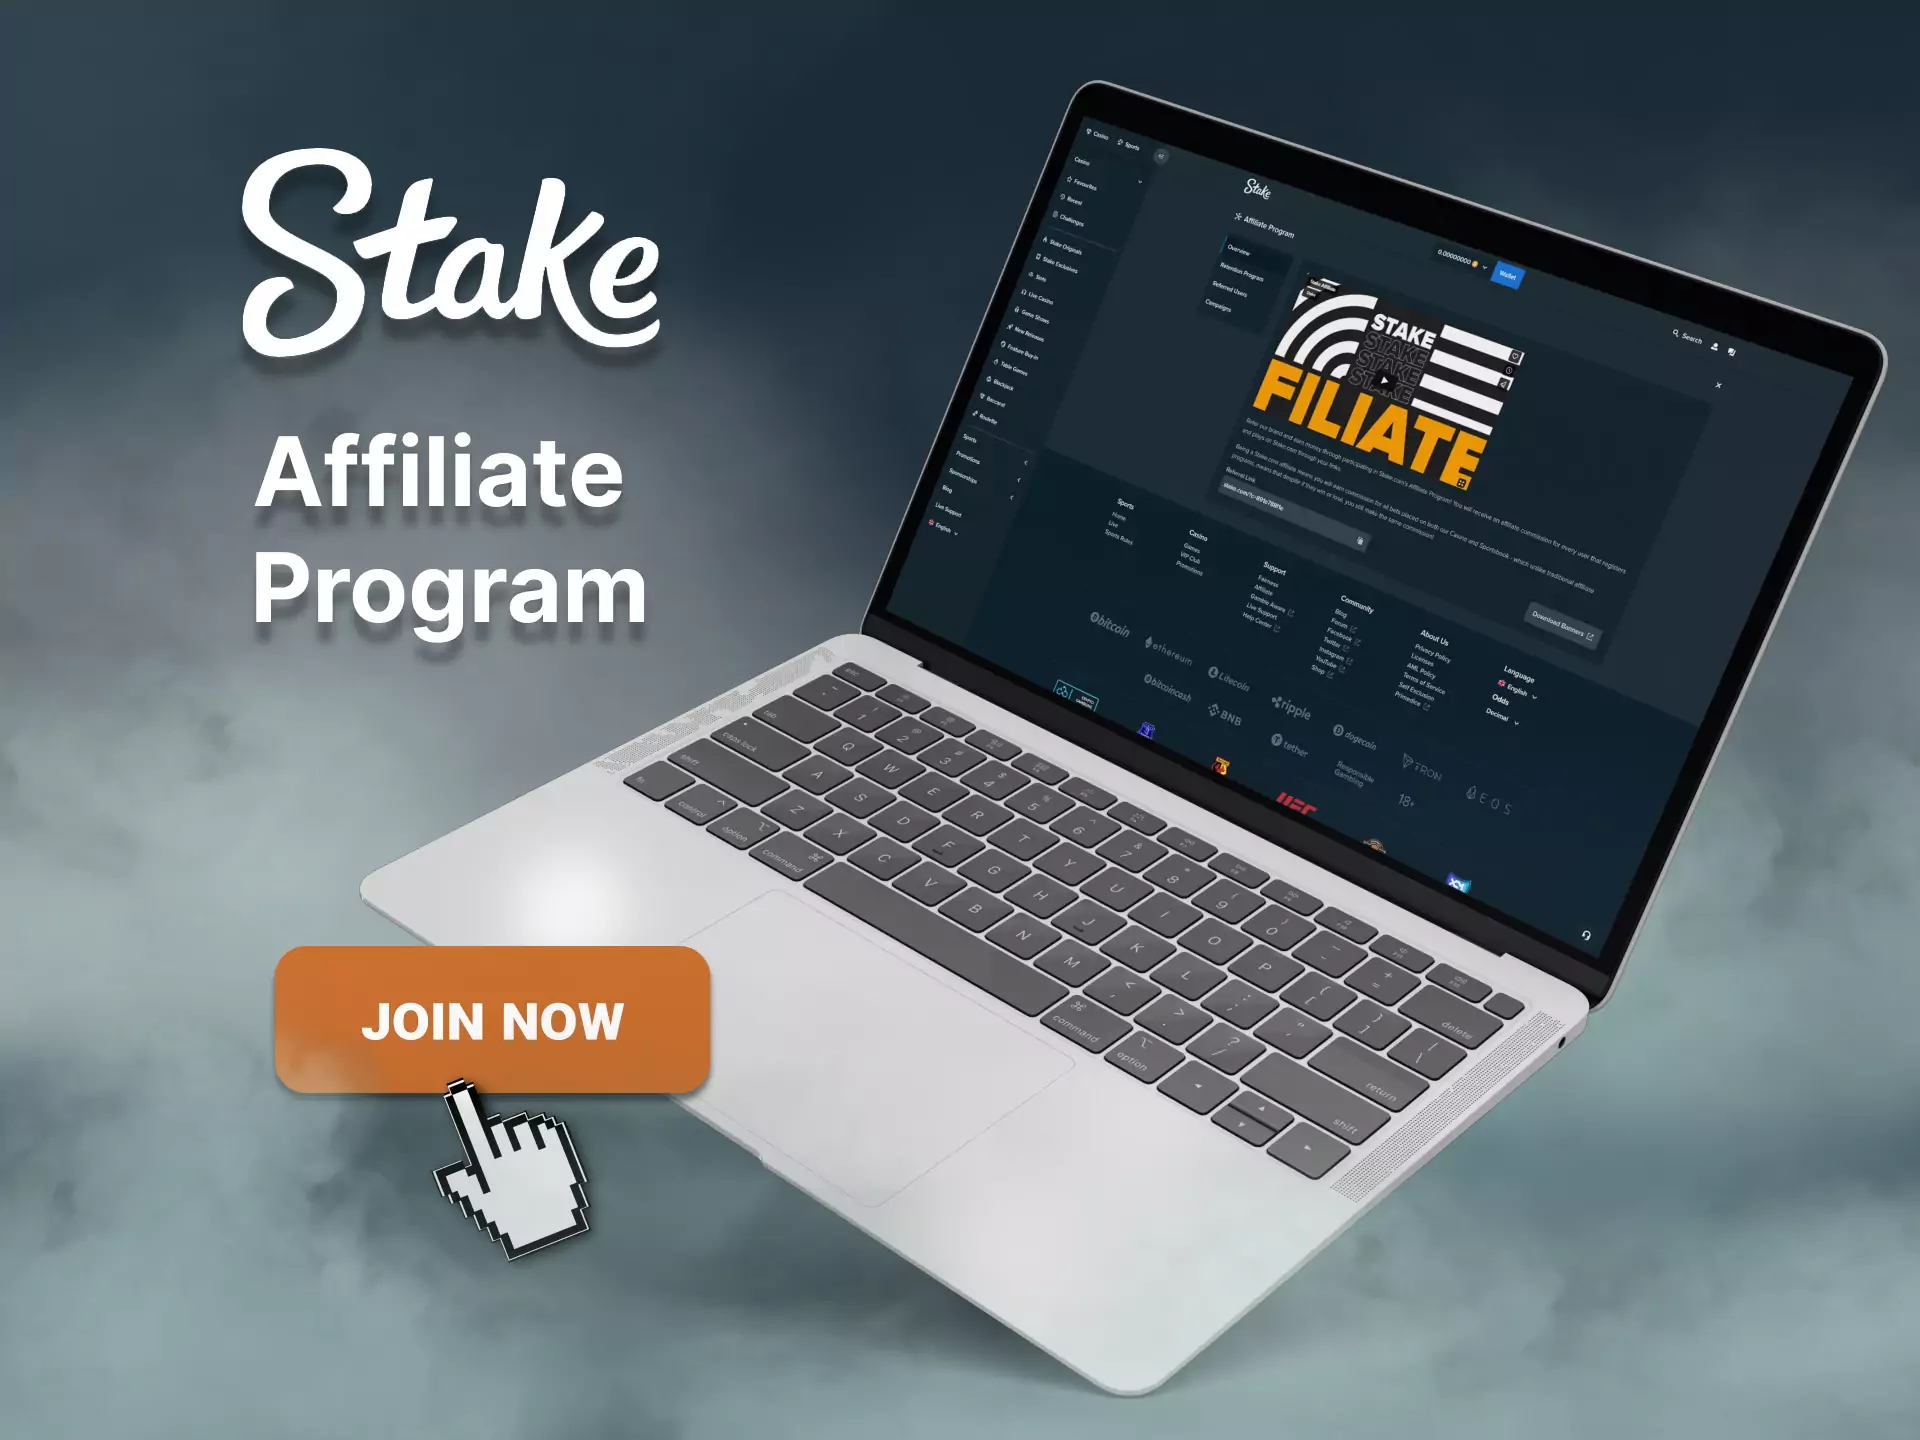 You can join the affiliate program of Stake and increase your profit by inviting friends.